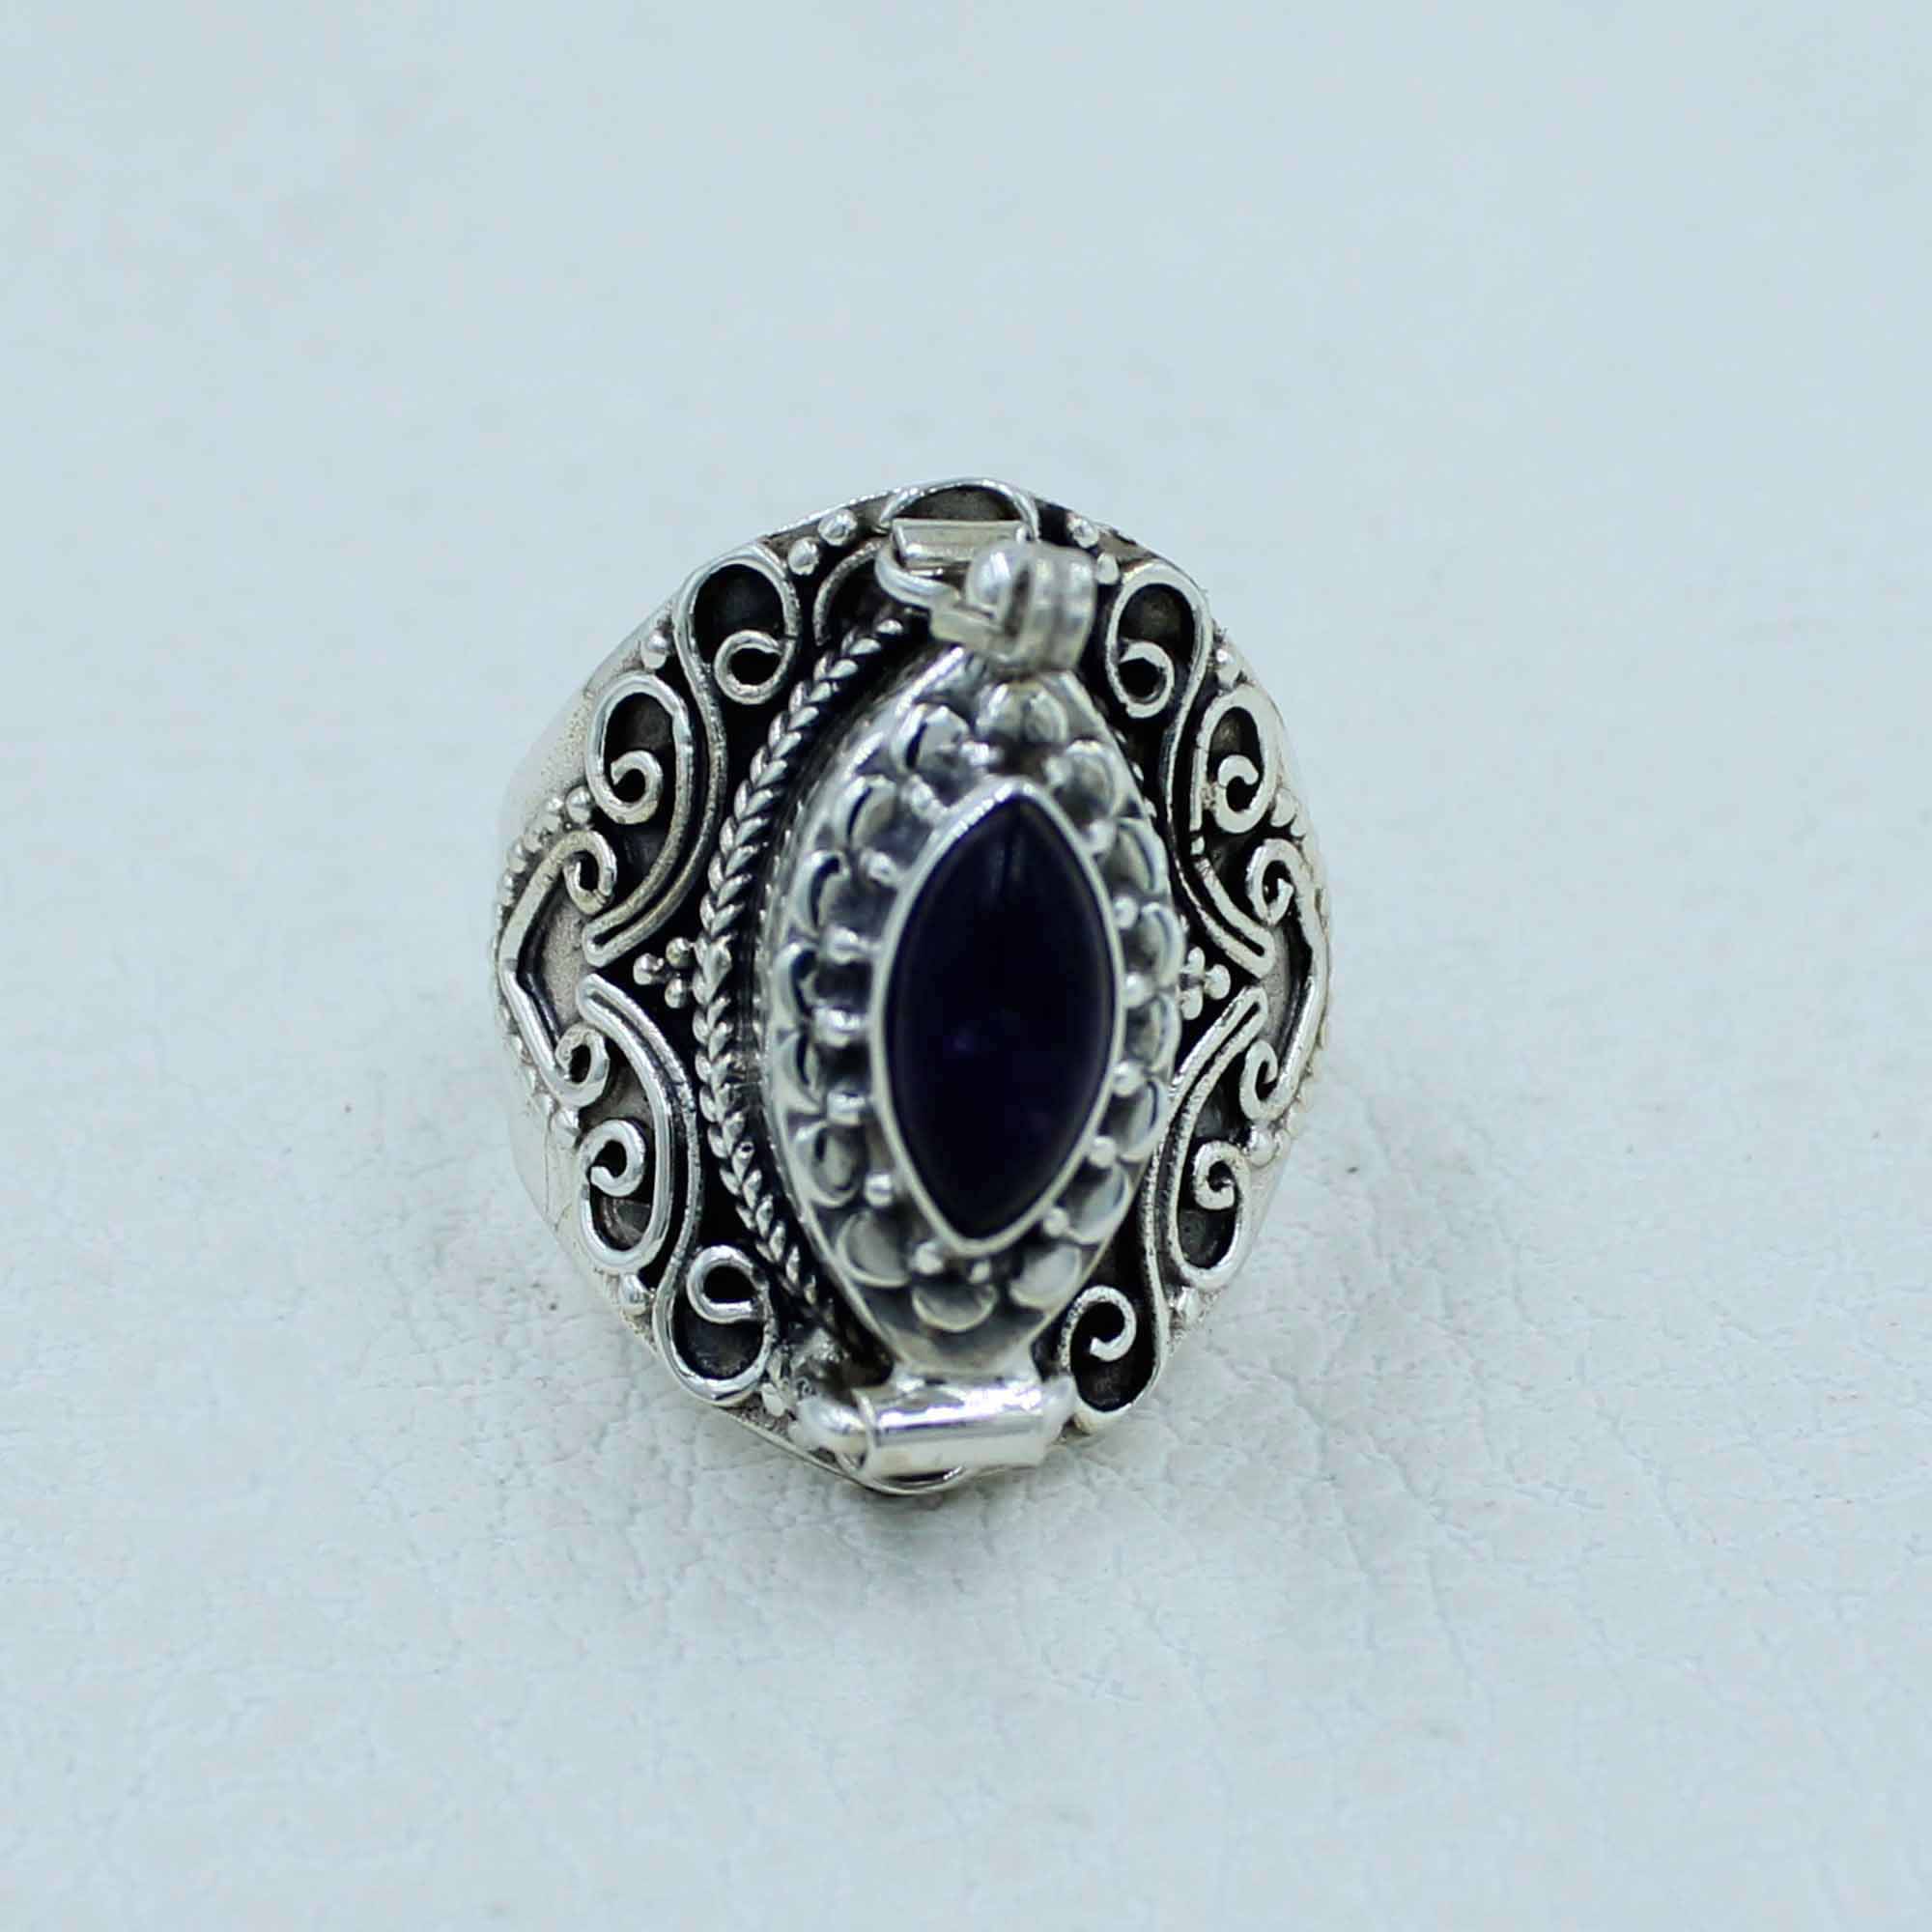 Amethyst Cabochon 925 Silver Poison Ring